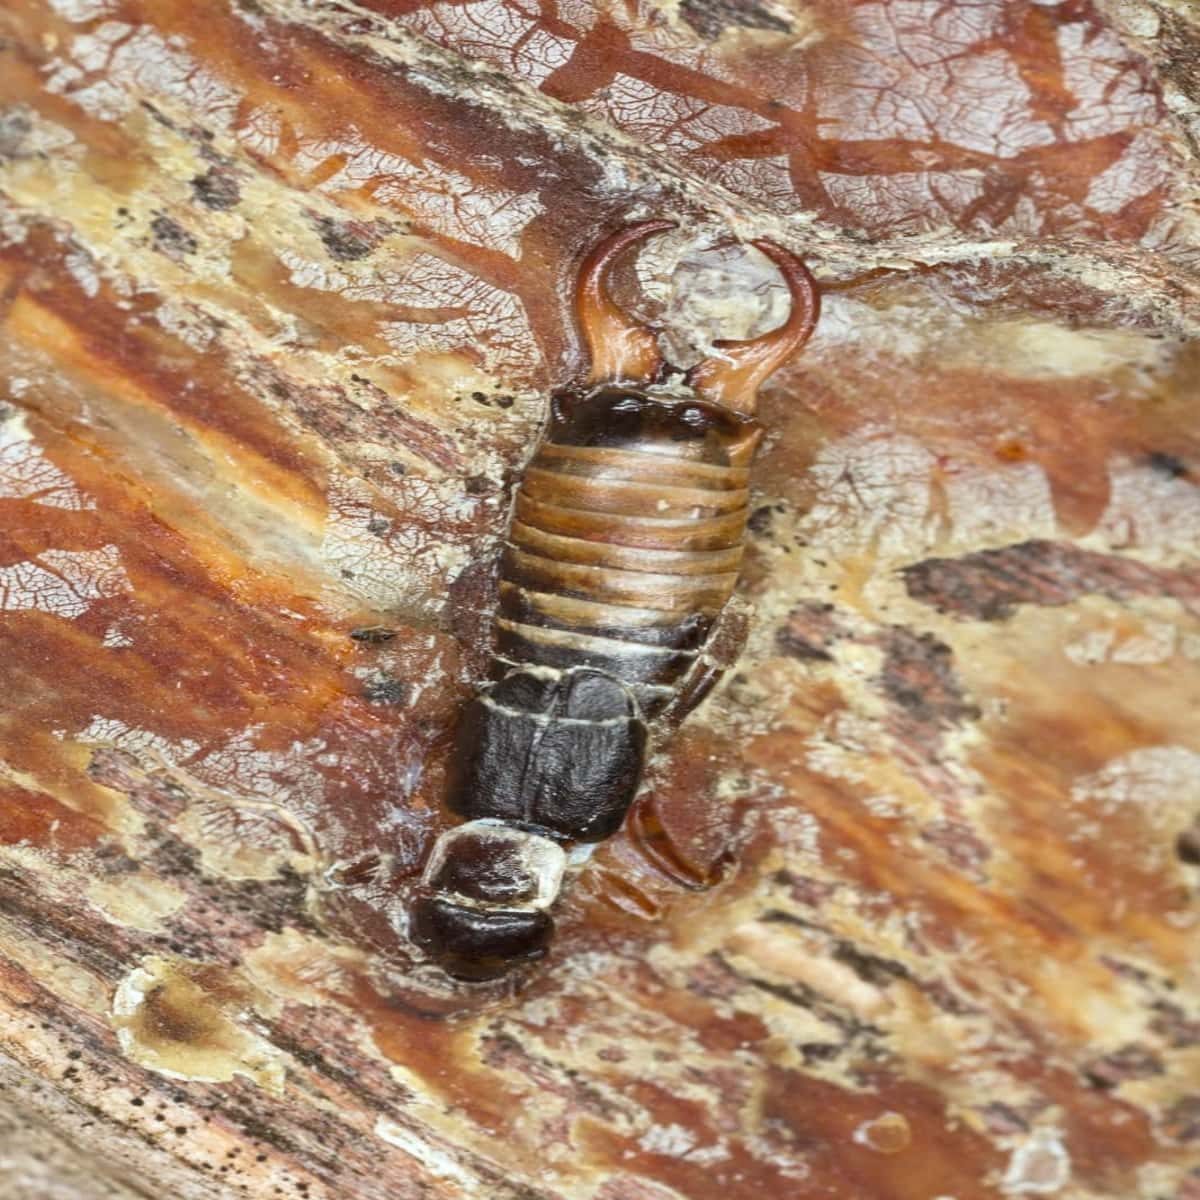 How To Get Rid Of Earwigs In The Home And Yard